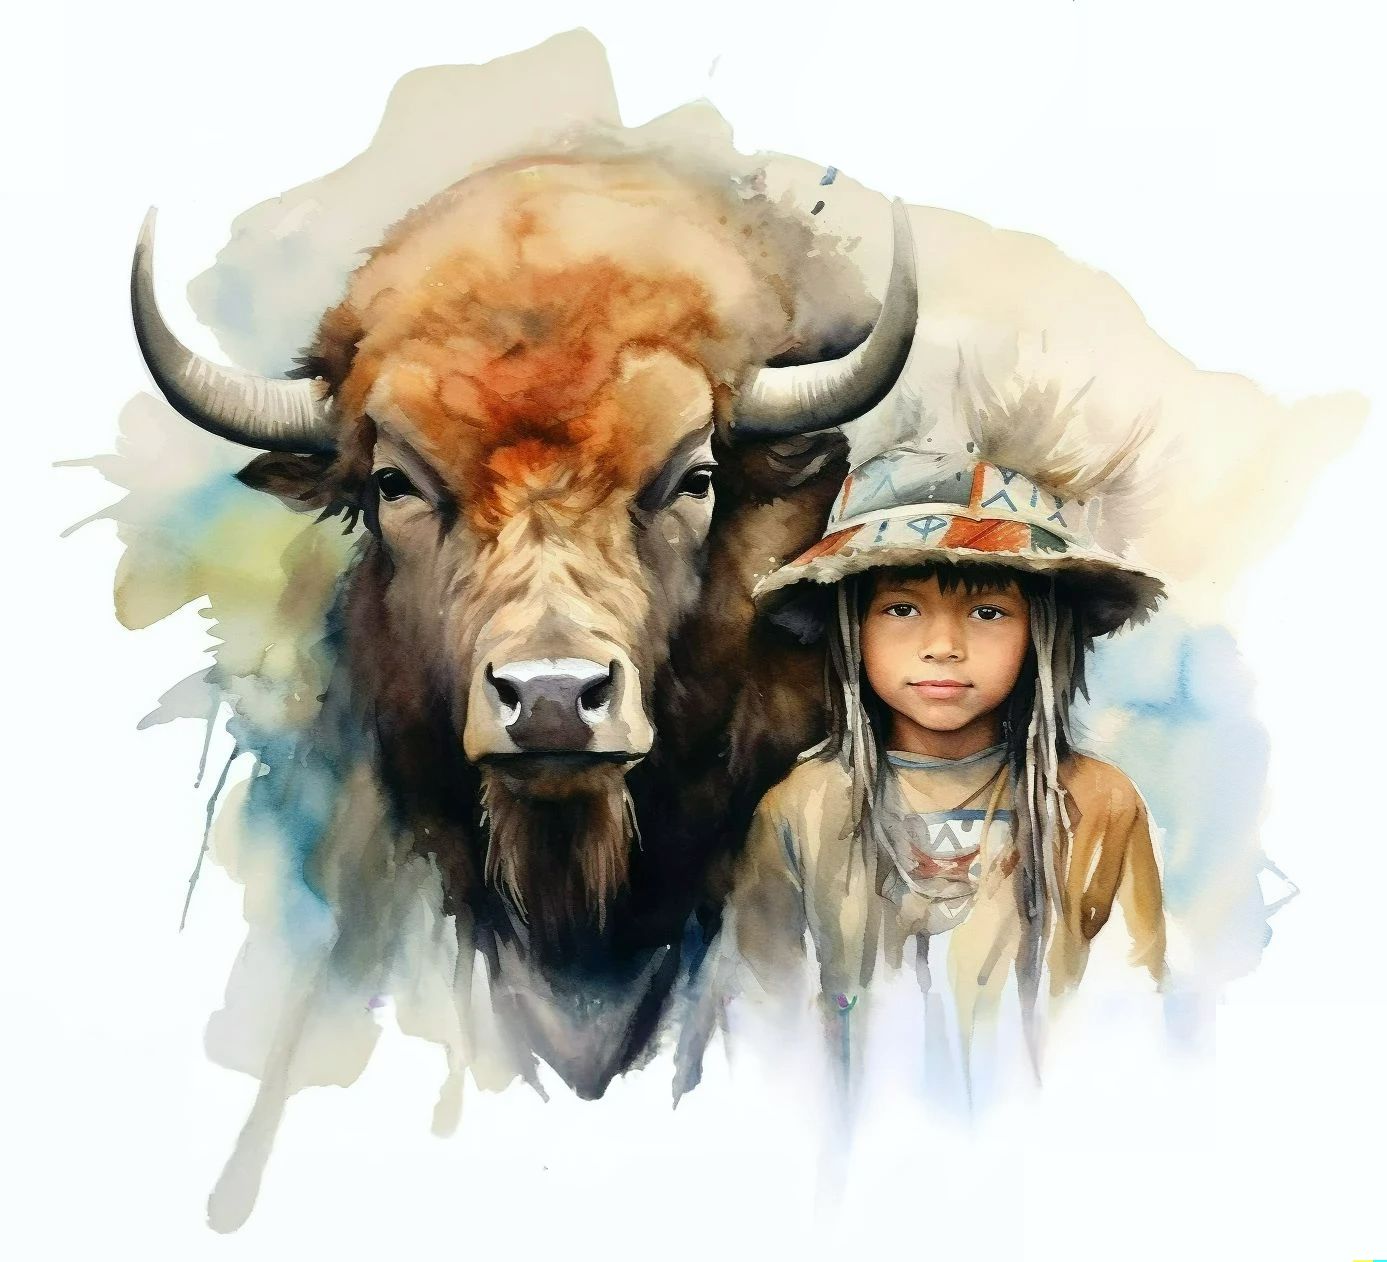 adorable american indian boy and his buffalo friend